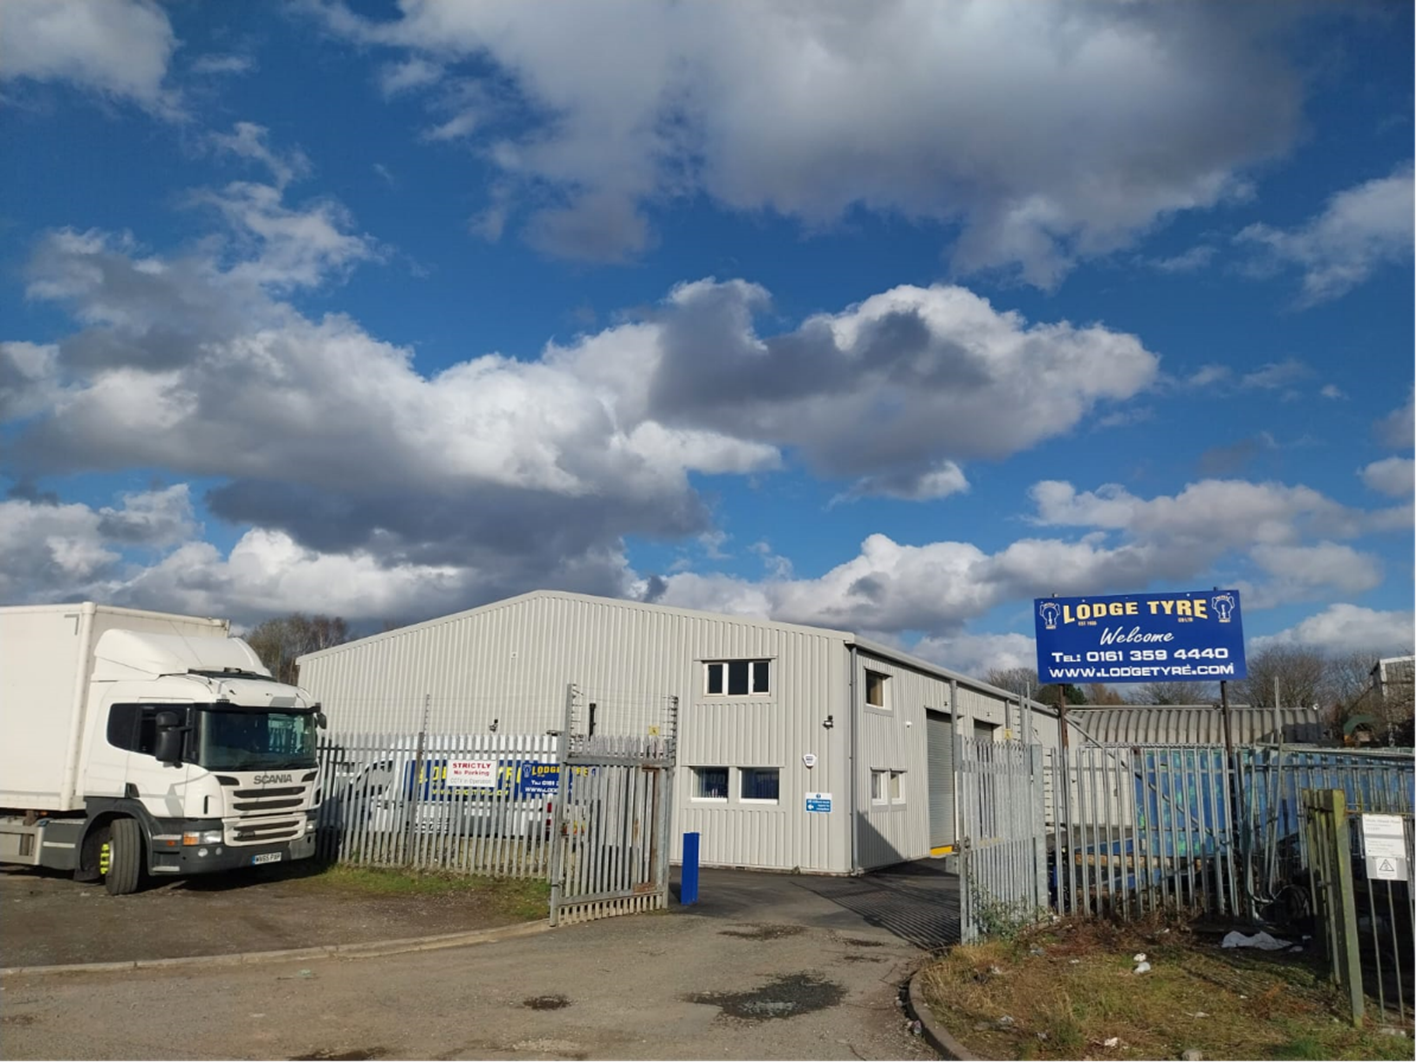 Lodge Tyre Manchester moves to bigger premises